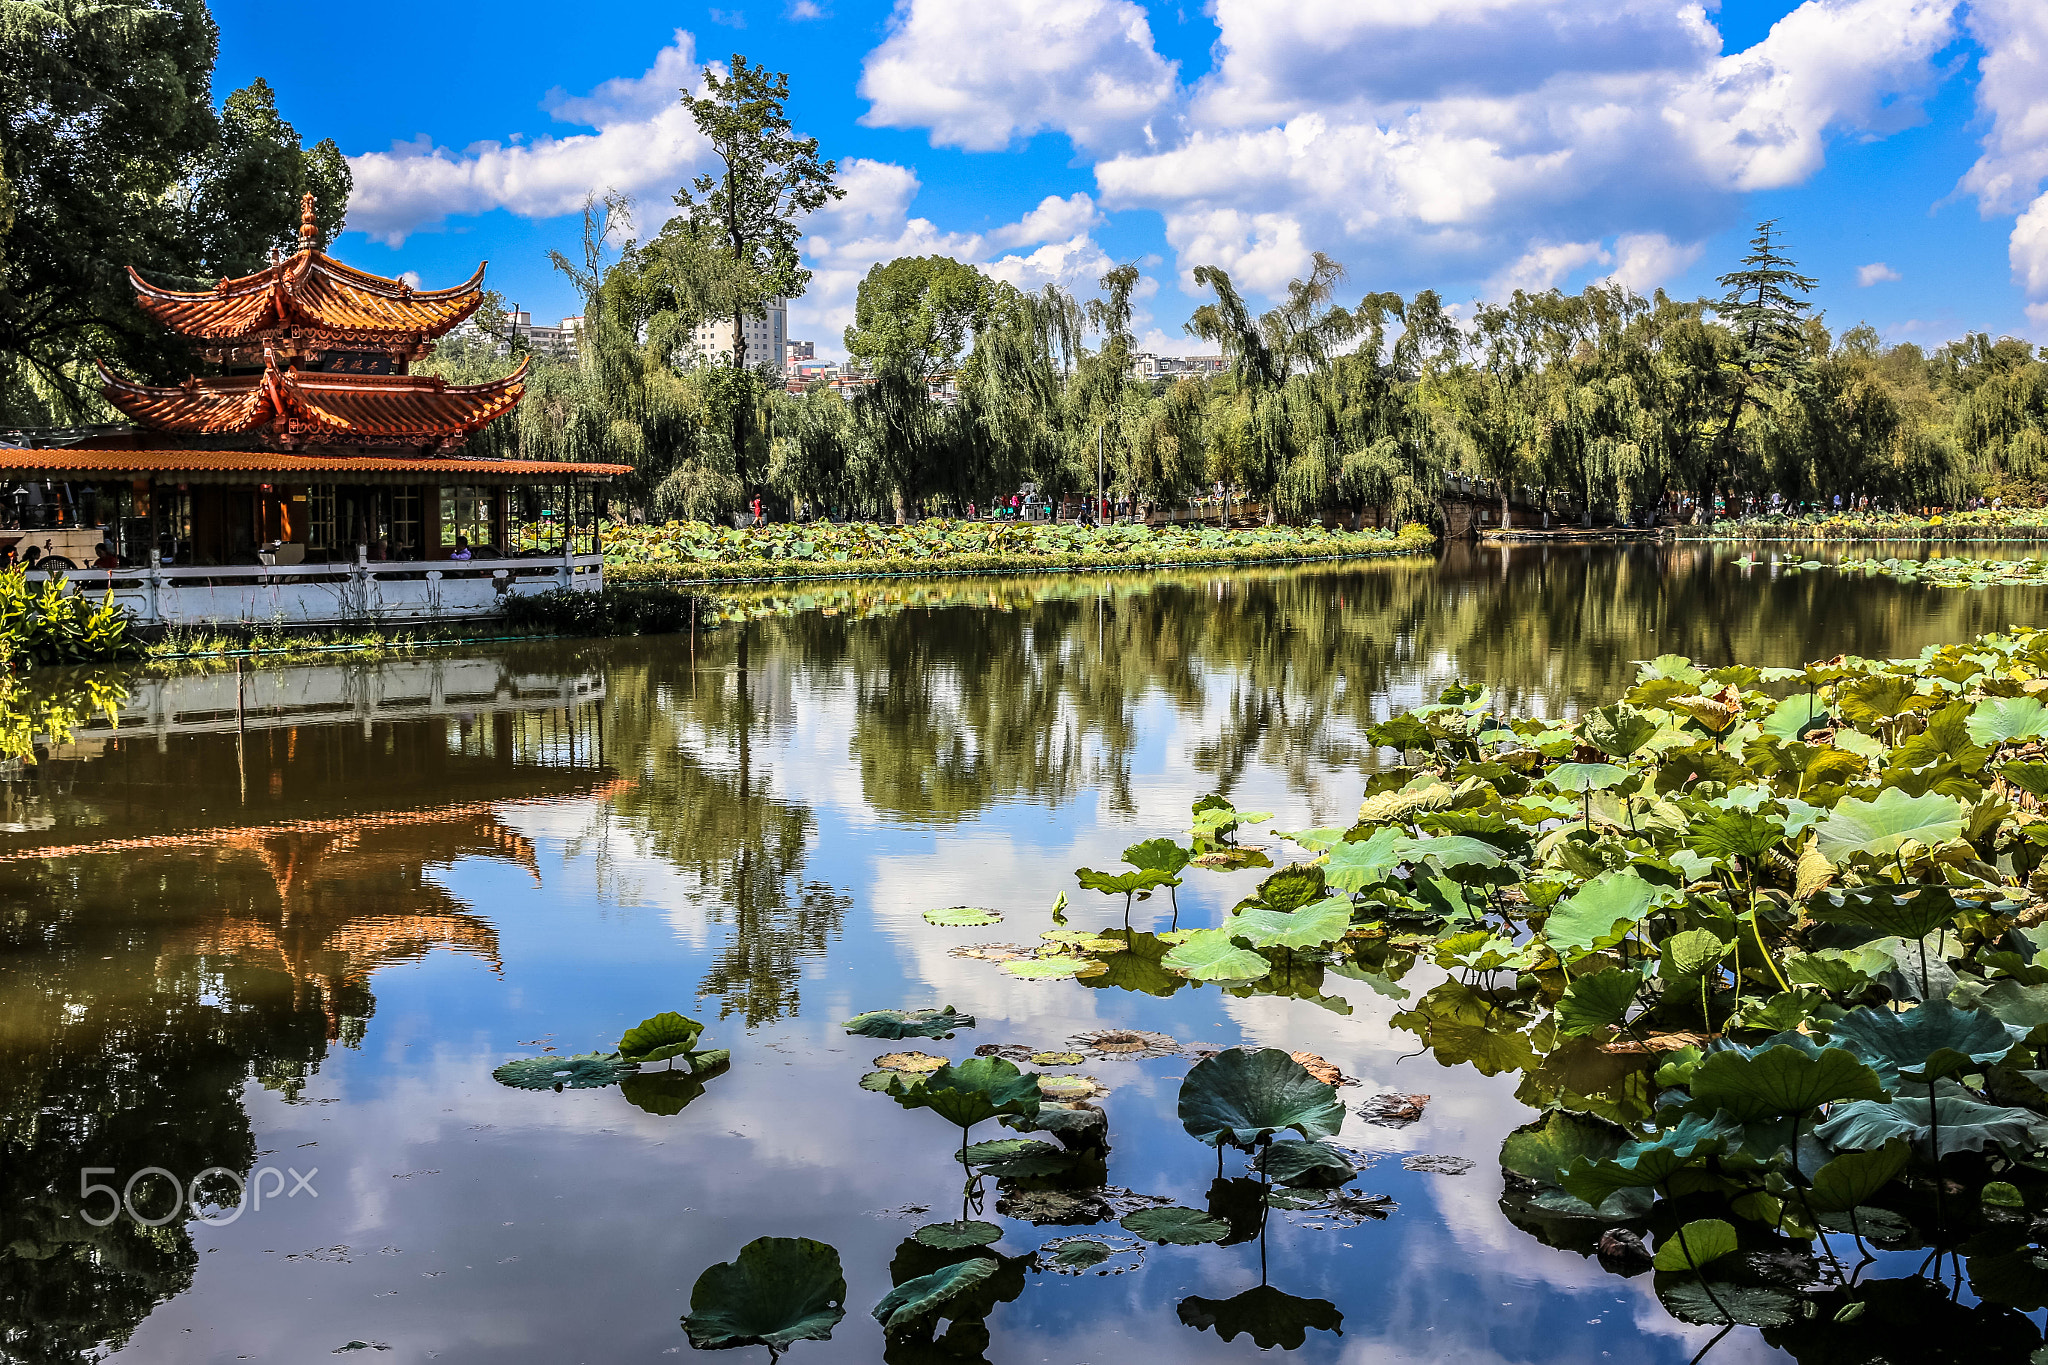 Beautiful green lake, a must visit place while in Kunming.